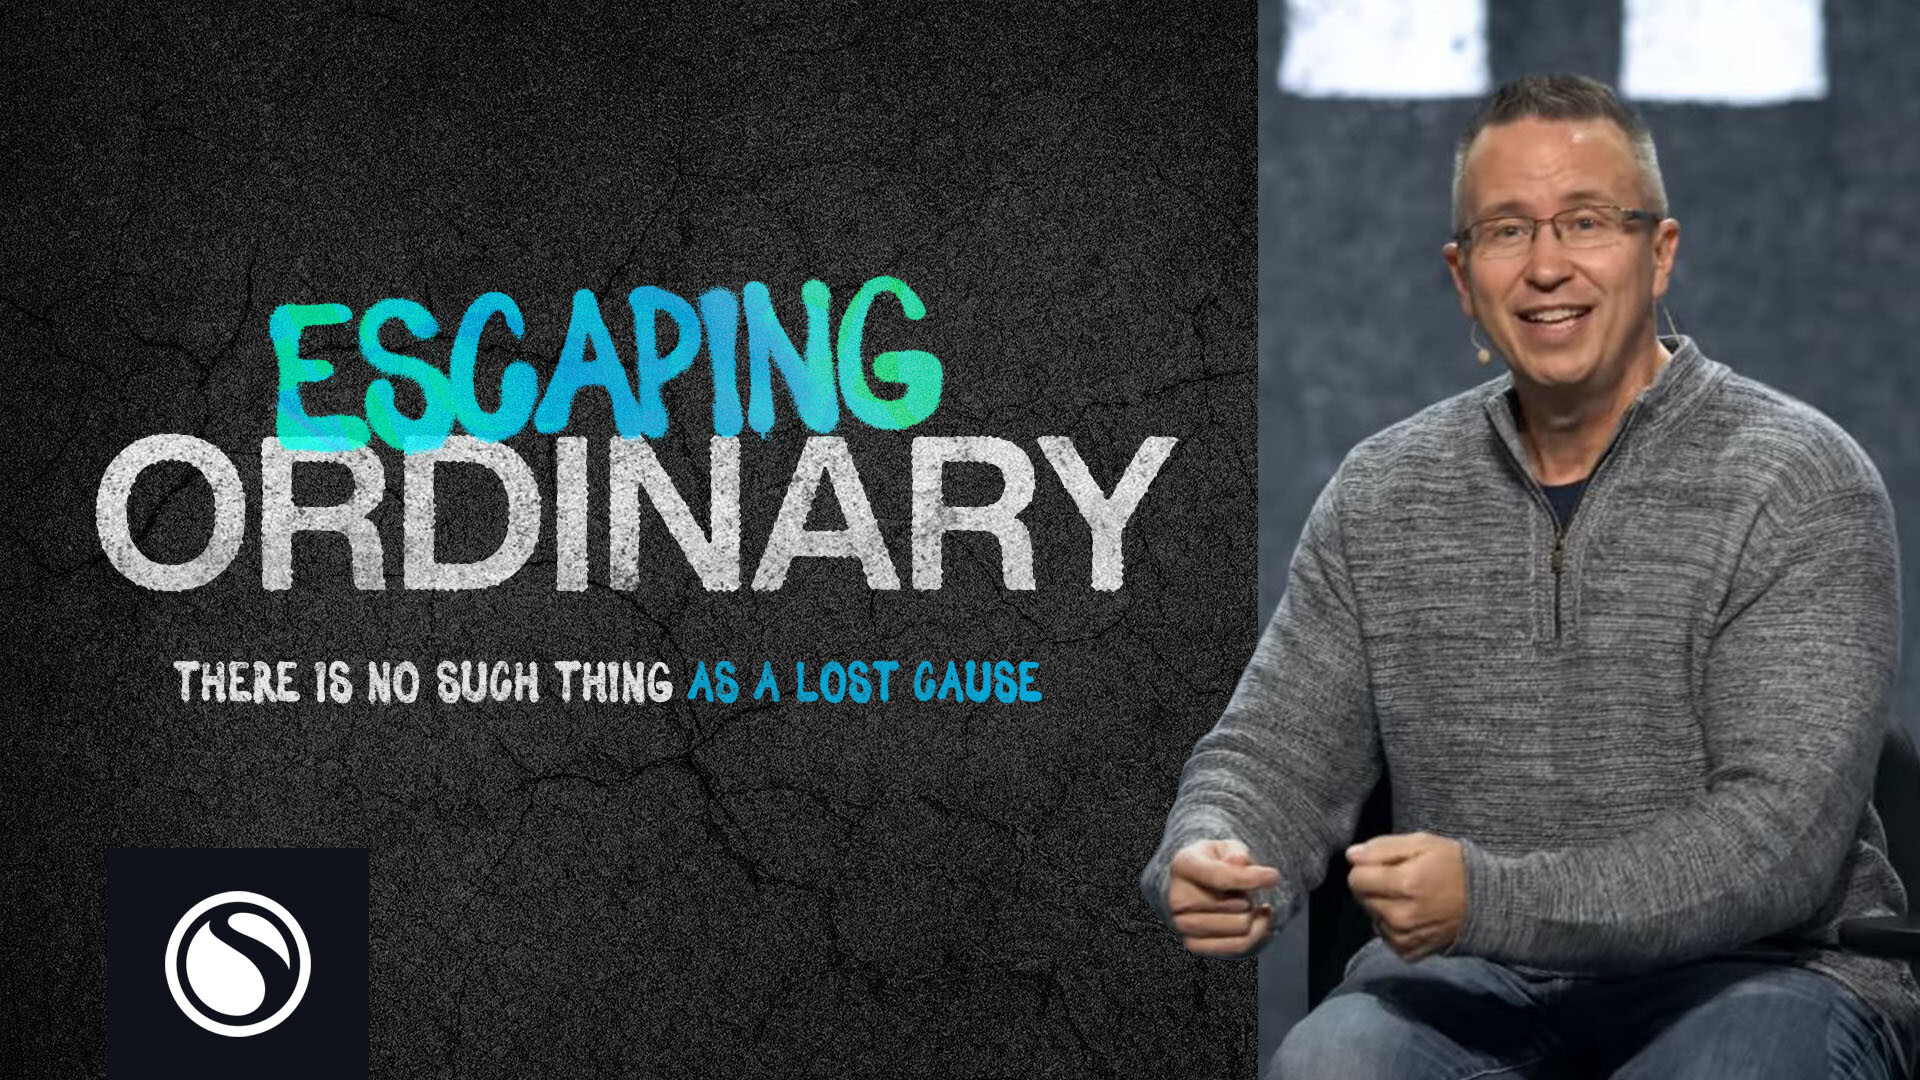 Watch Escaping Ordinary - There Is No Such Thing As A Lost Cause